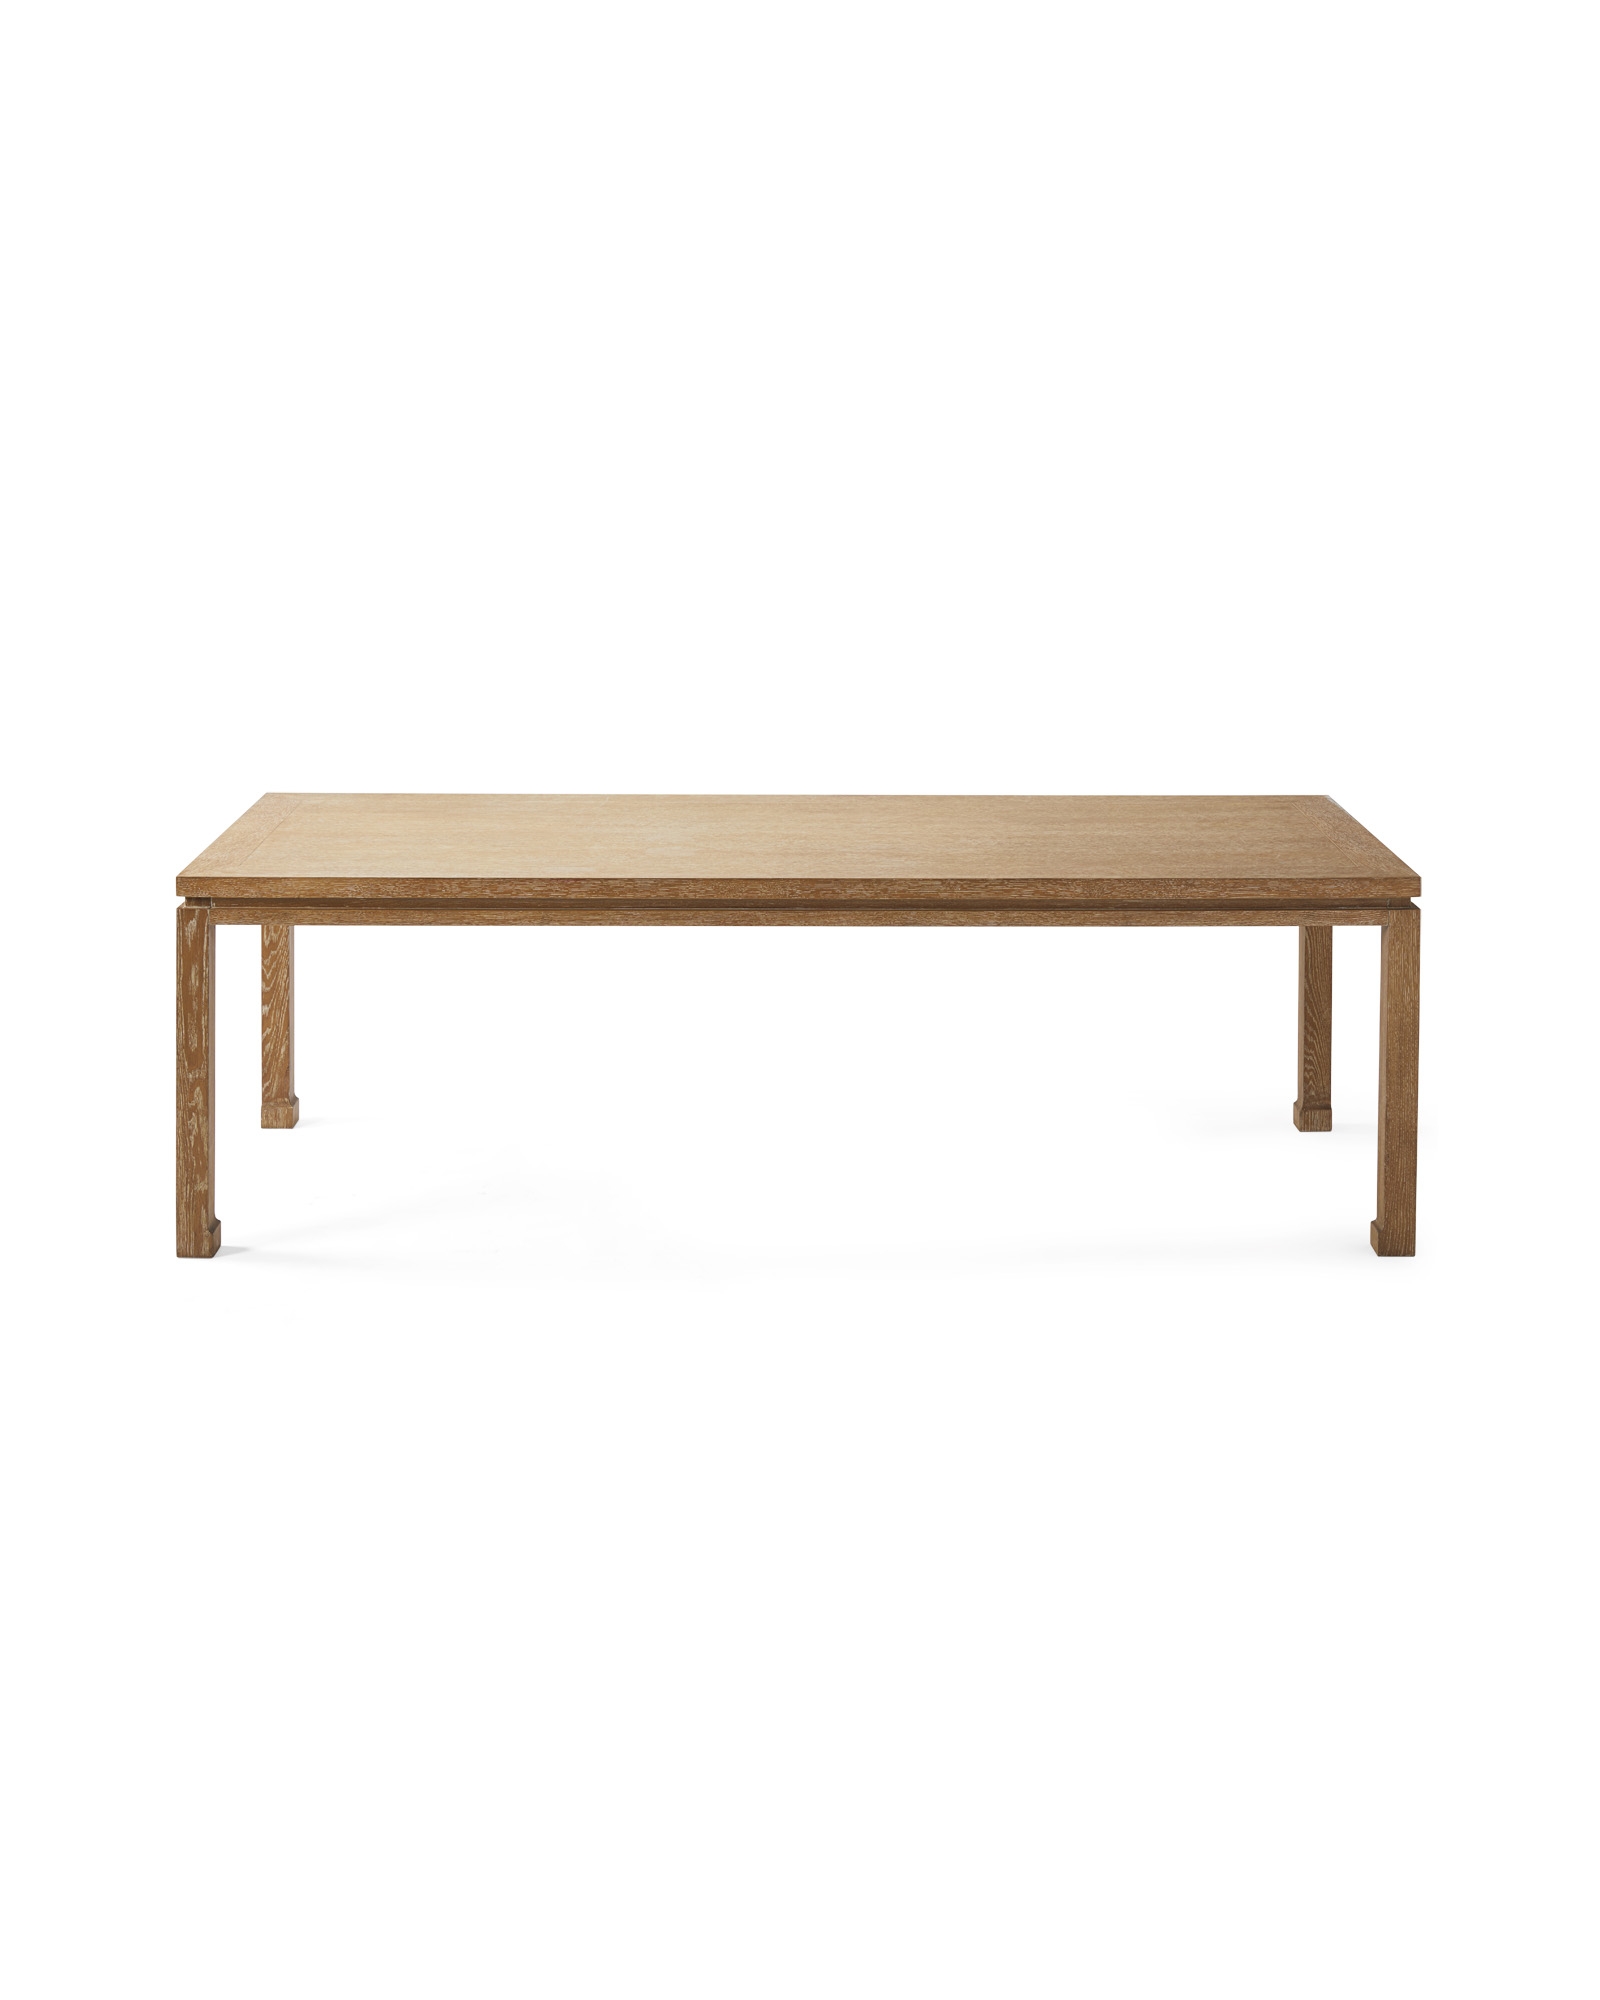 Reese Dining Table - Image 2